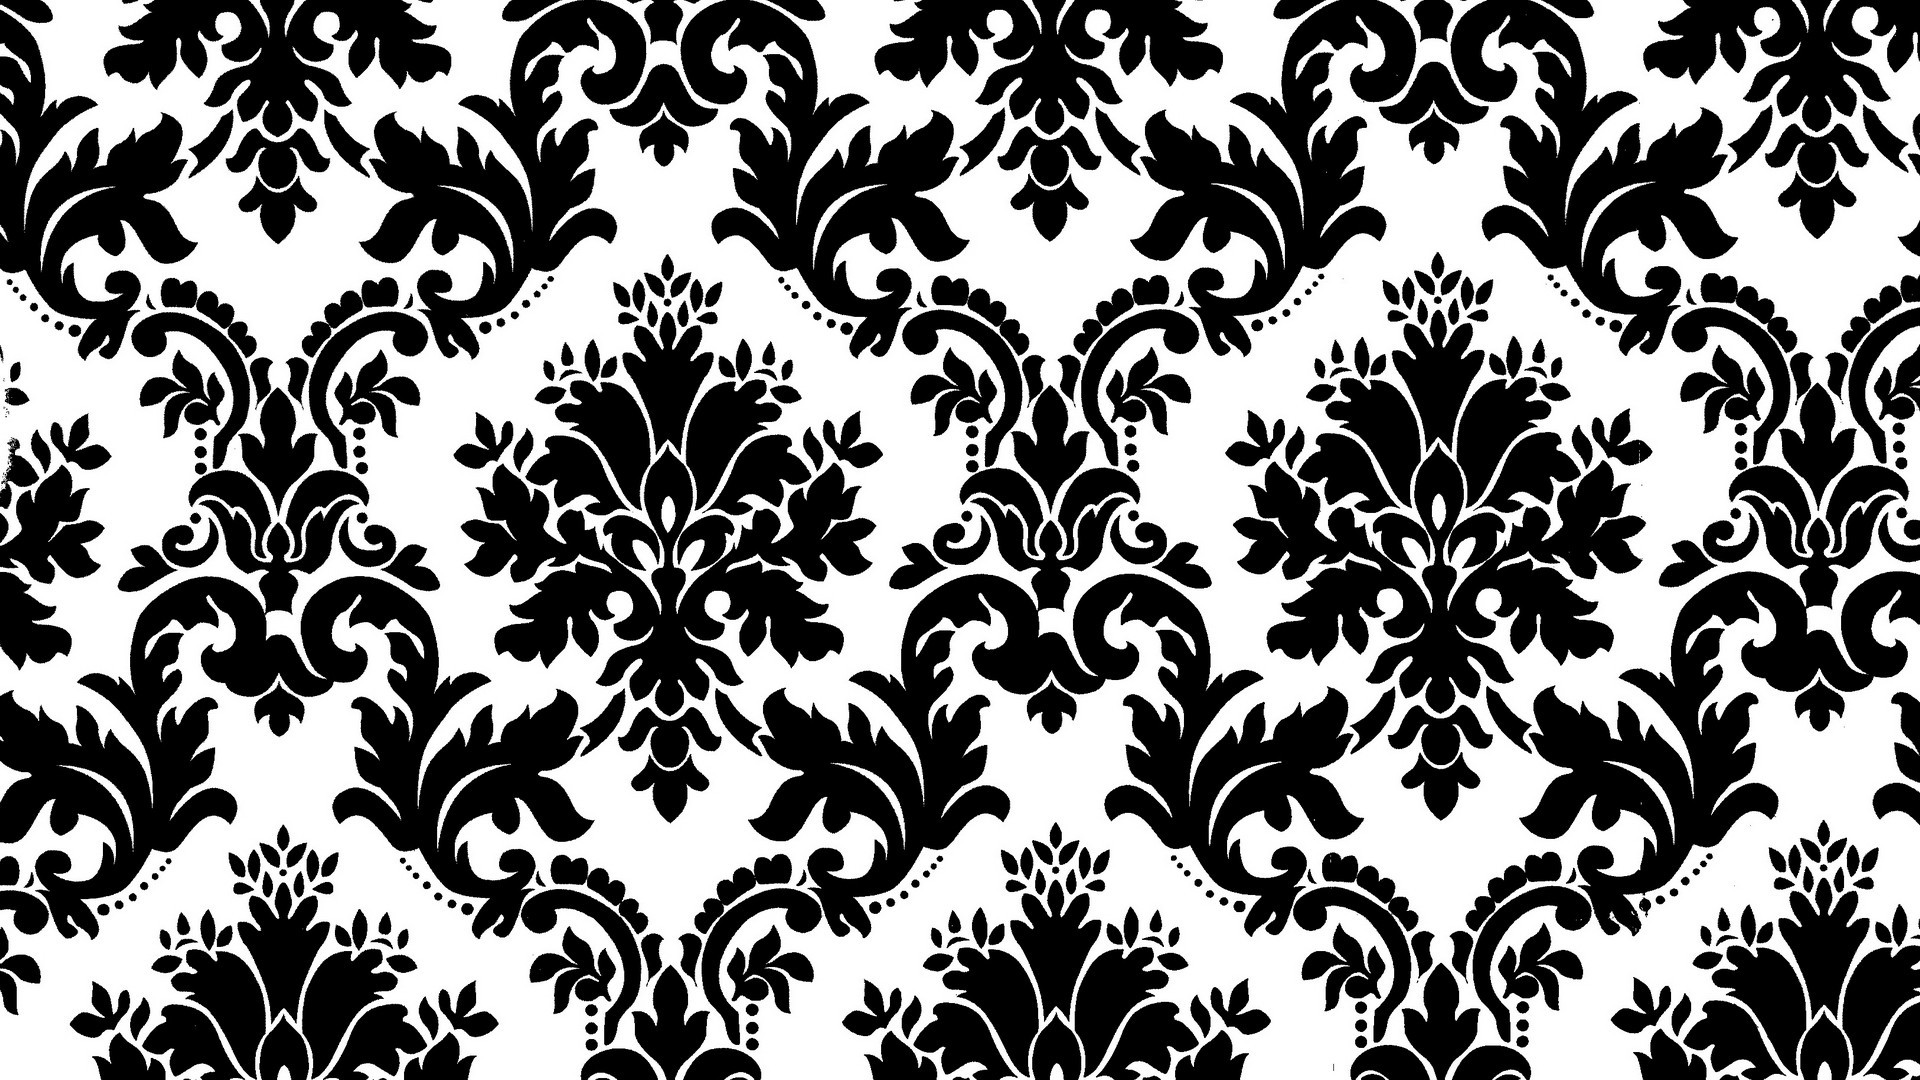 1920x1080 1920s wallpaper of patterns hd desktop wallpapers cool images amazing hd  download apple background wallpapers colourfull lovely wallpapers 1920Ã1080  ...